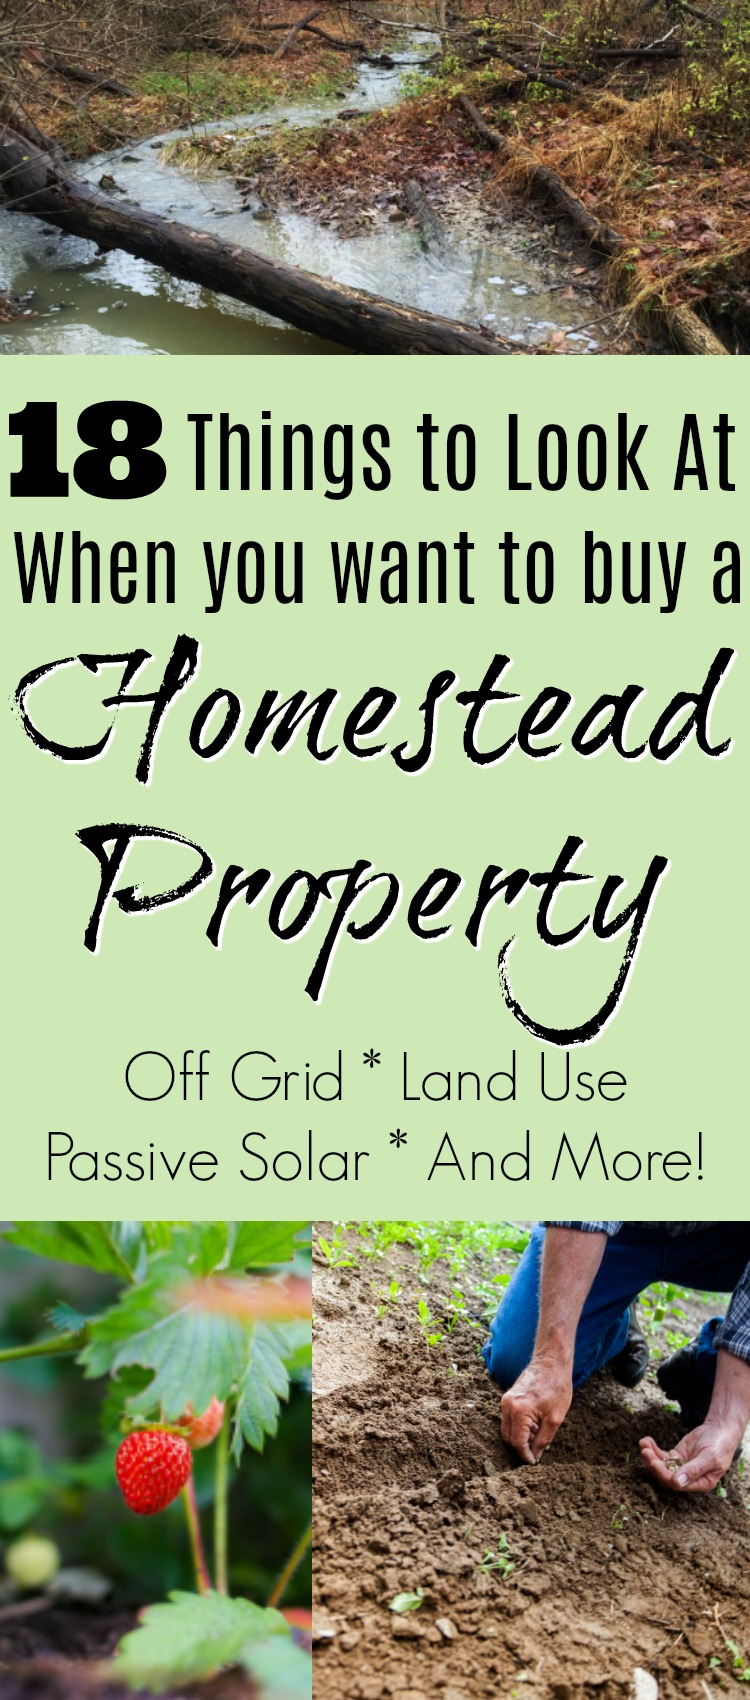 What you need to consider when you look at land for setting up a new homestead #homesteading #buyingland